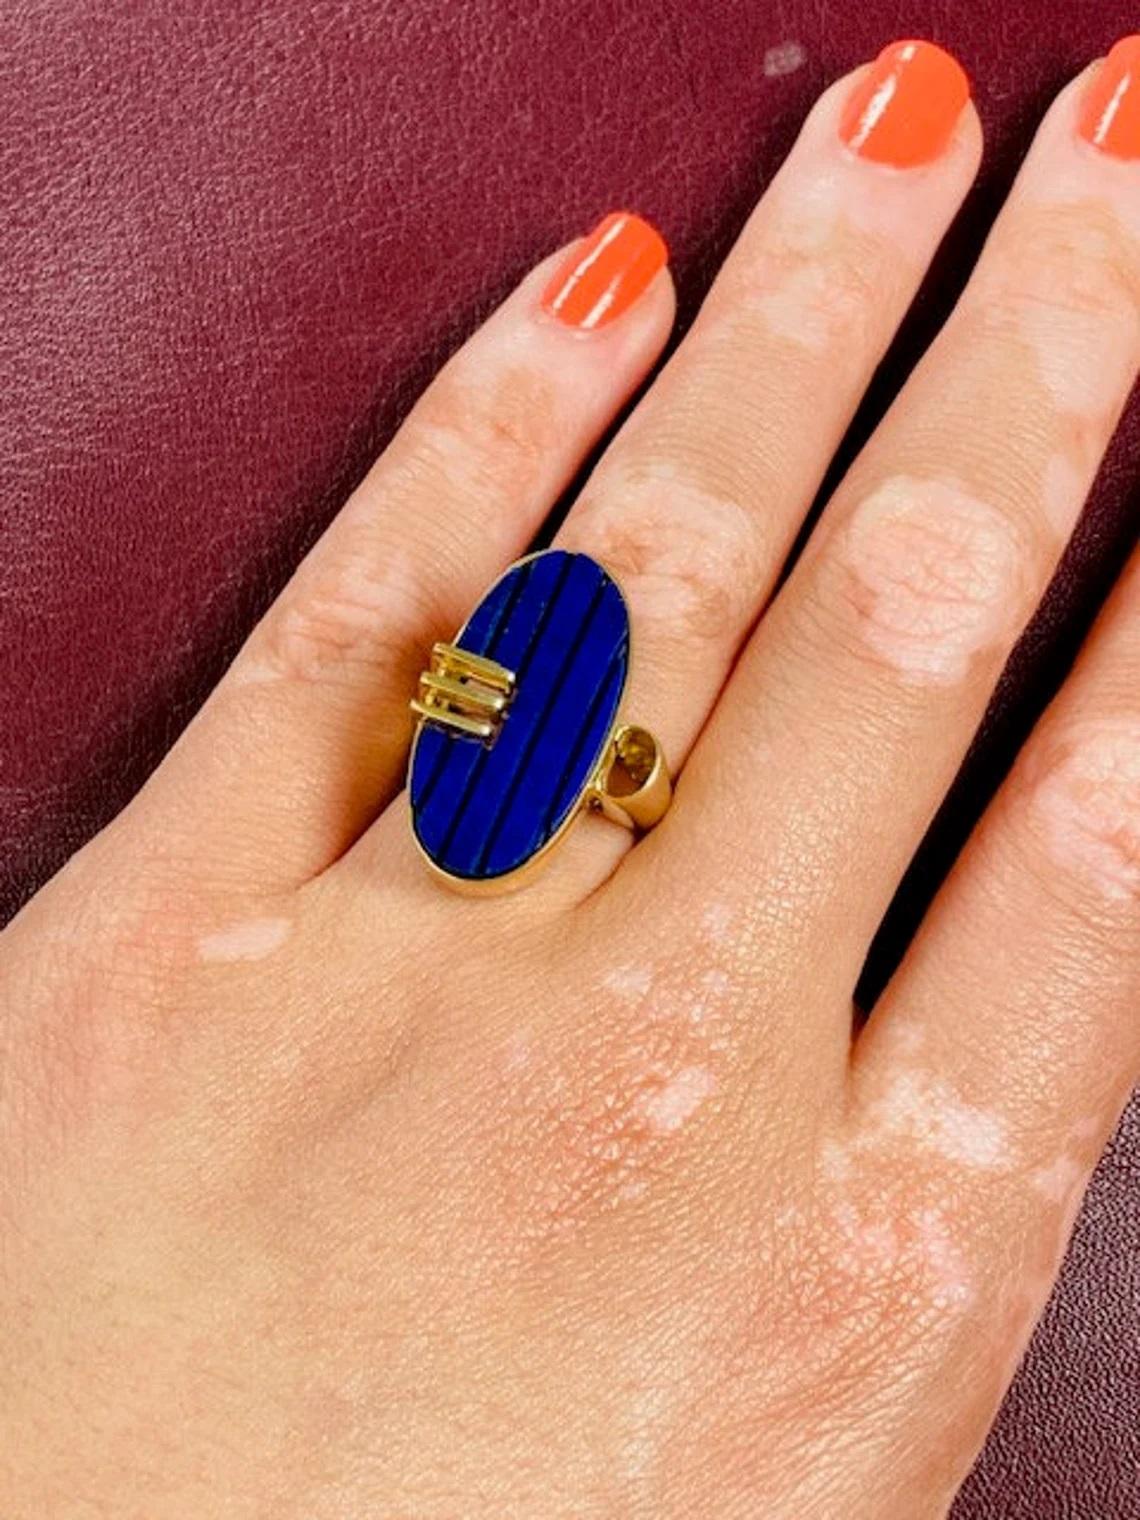 Vintage 14k Gold Lapis Lazuli Oval Ring One-of-a-kind

This statement ring is perfect to add a pop of colour to any look. The striking lapis lazuli is beautifully complemented by the 14k yellow gold and this piece is made to perfectly fit a size